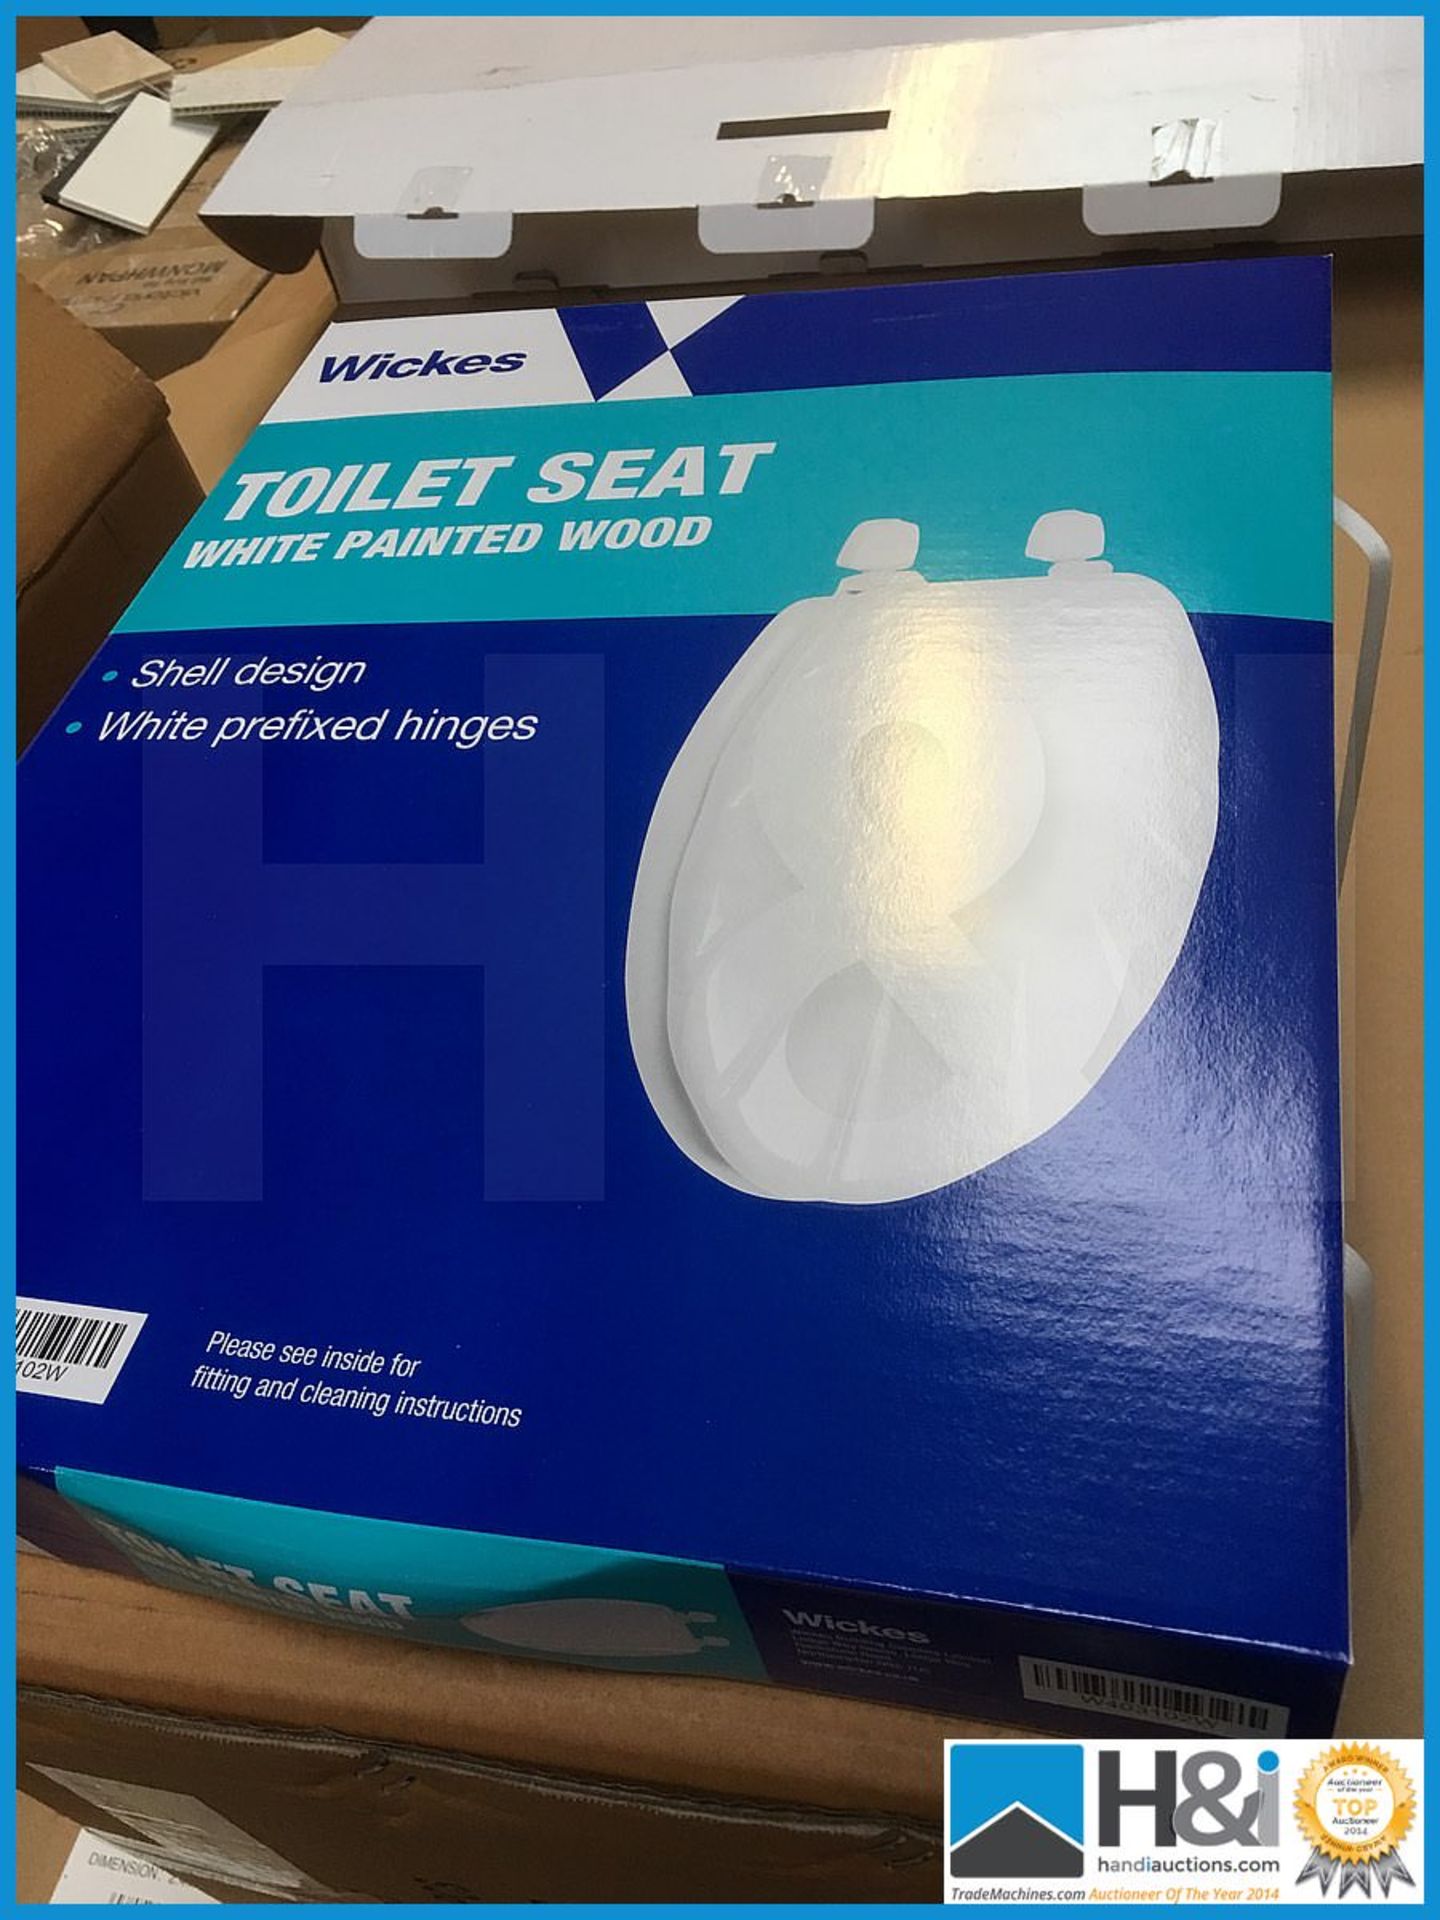 Designer Wickes white painted wood shell design toilet seat. New and Boxed. Suggested